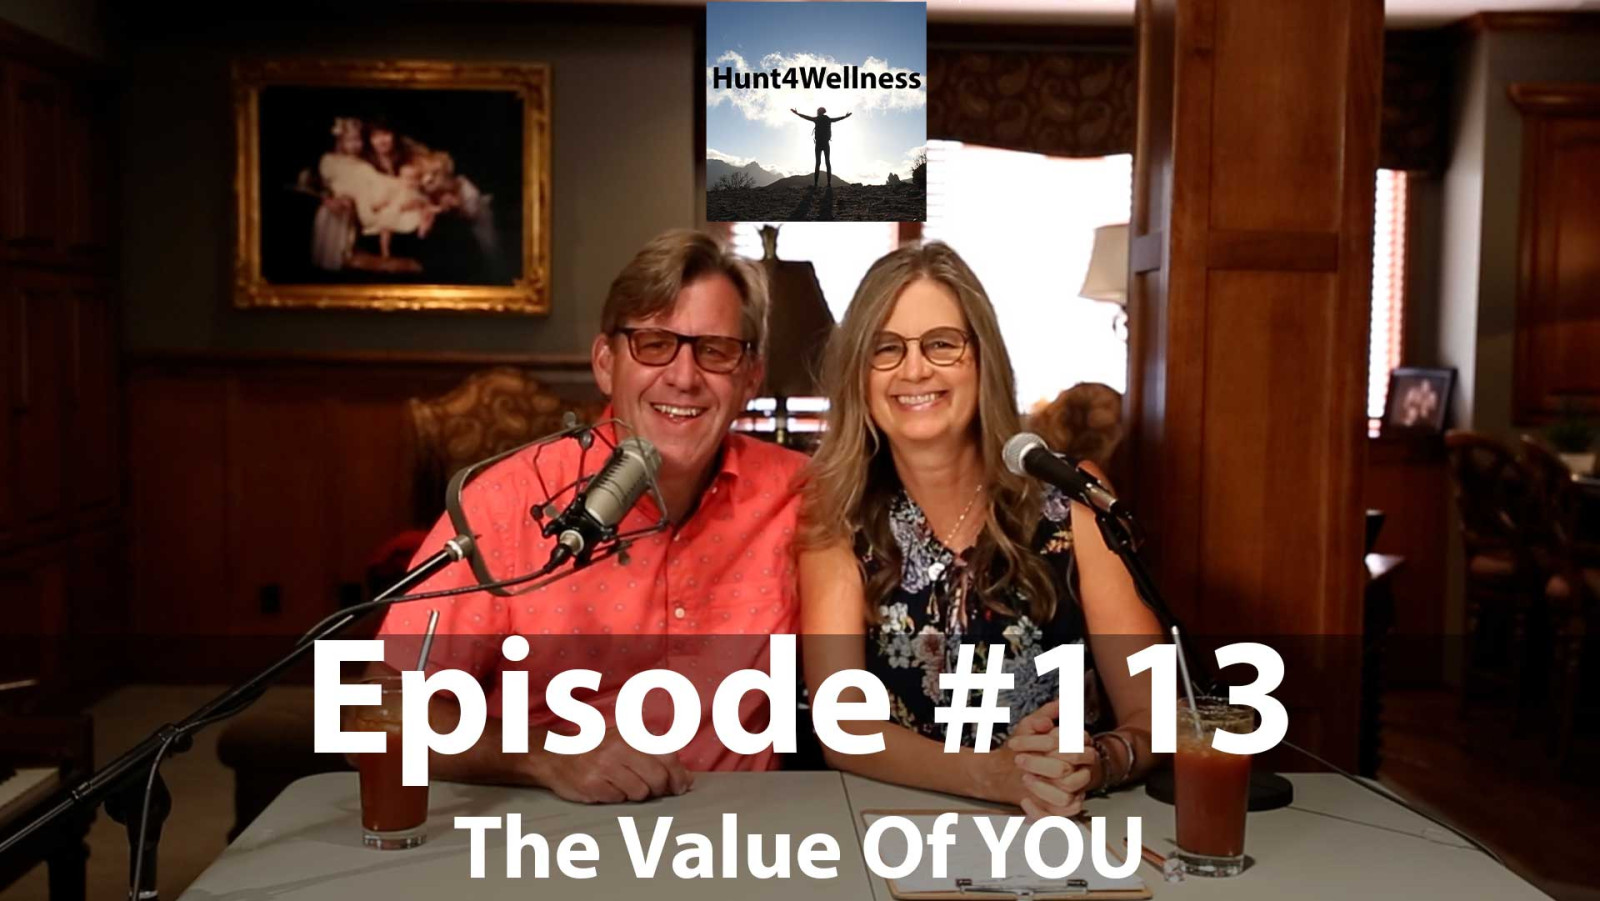 Episode #113 - The Value Of You